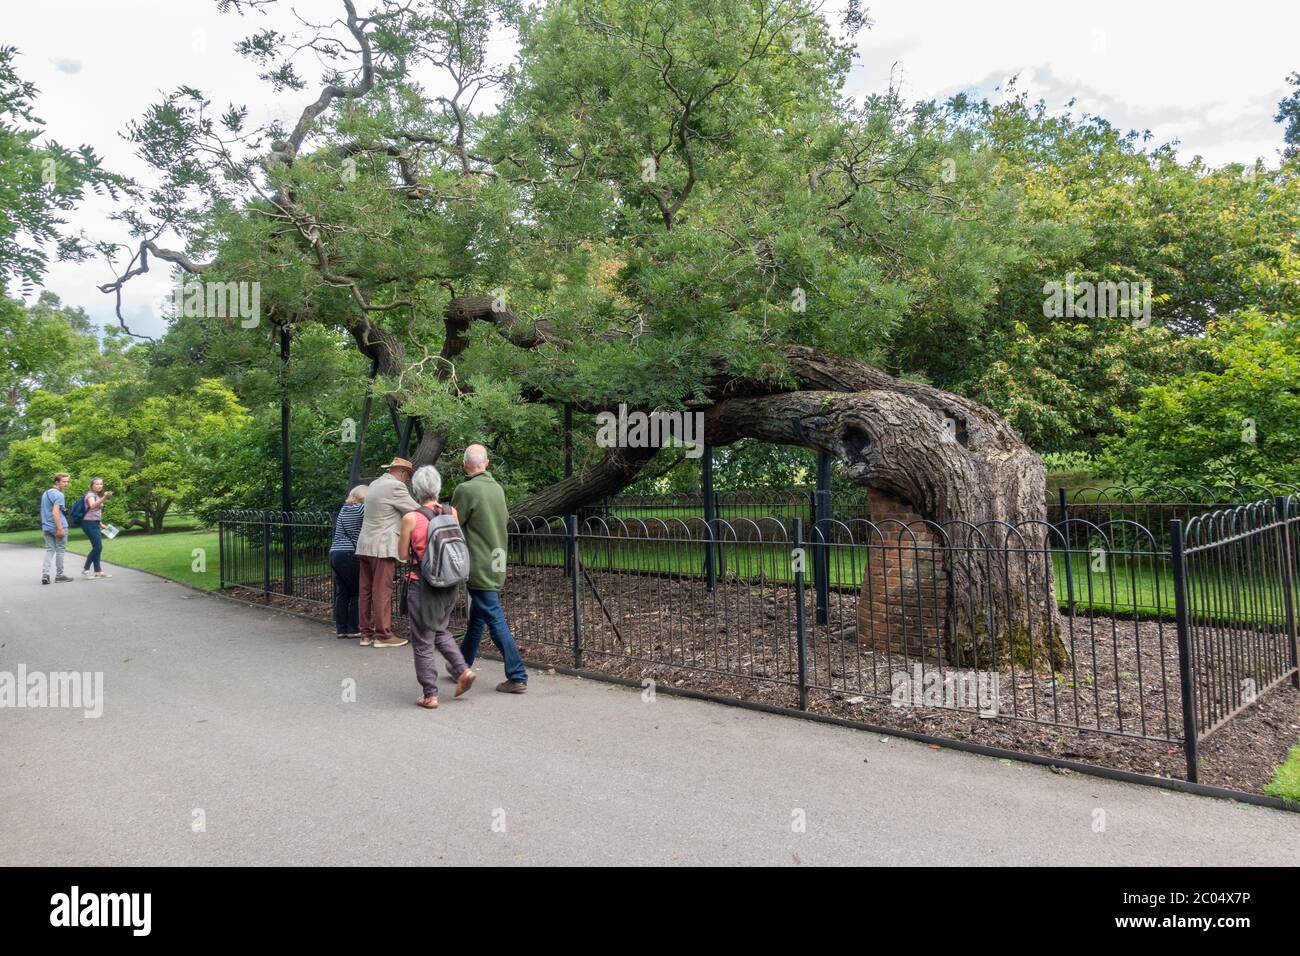 The Japanese pagoda tree, one of Kew's 'Old Lions', in the Royal Botanic Gardens, Kew, Richmond Upon Thames, England, UK. Stock Photo